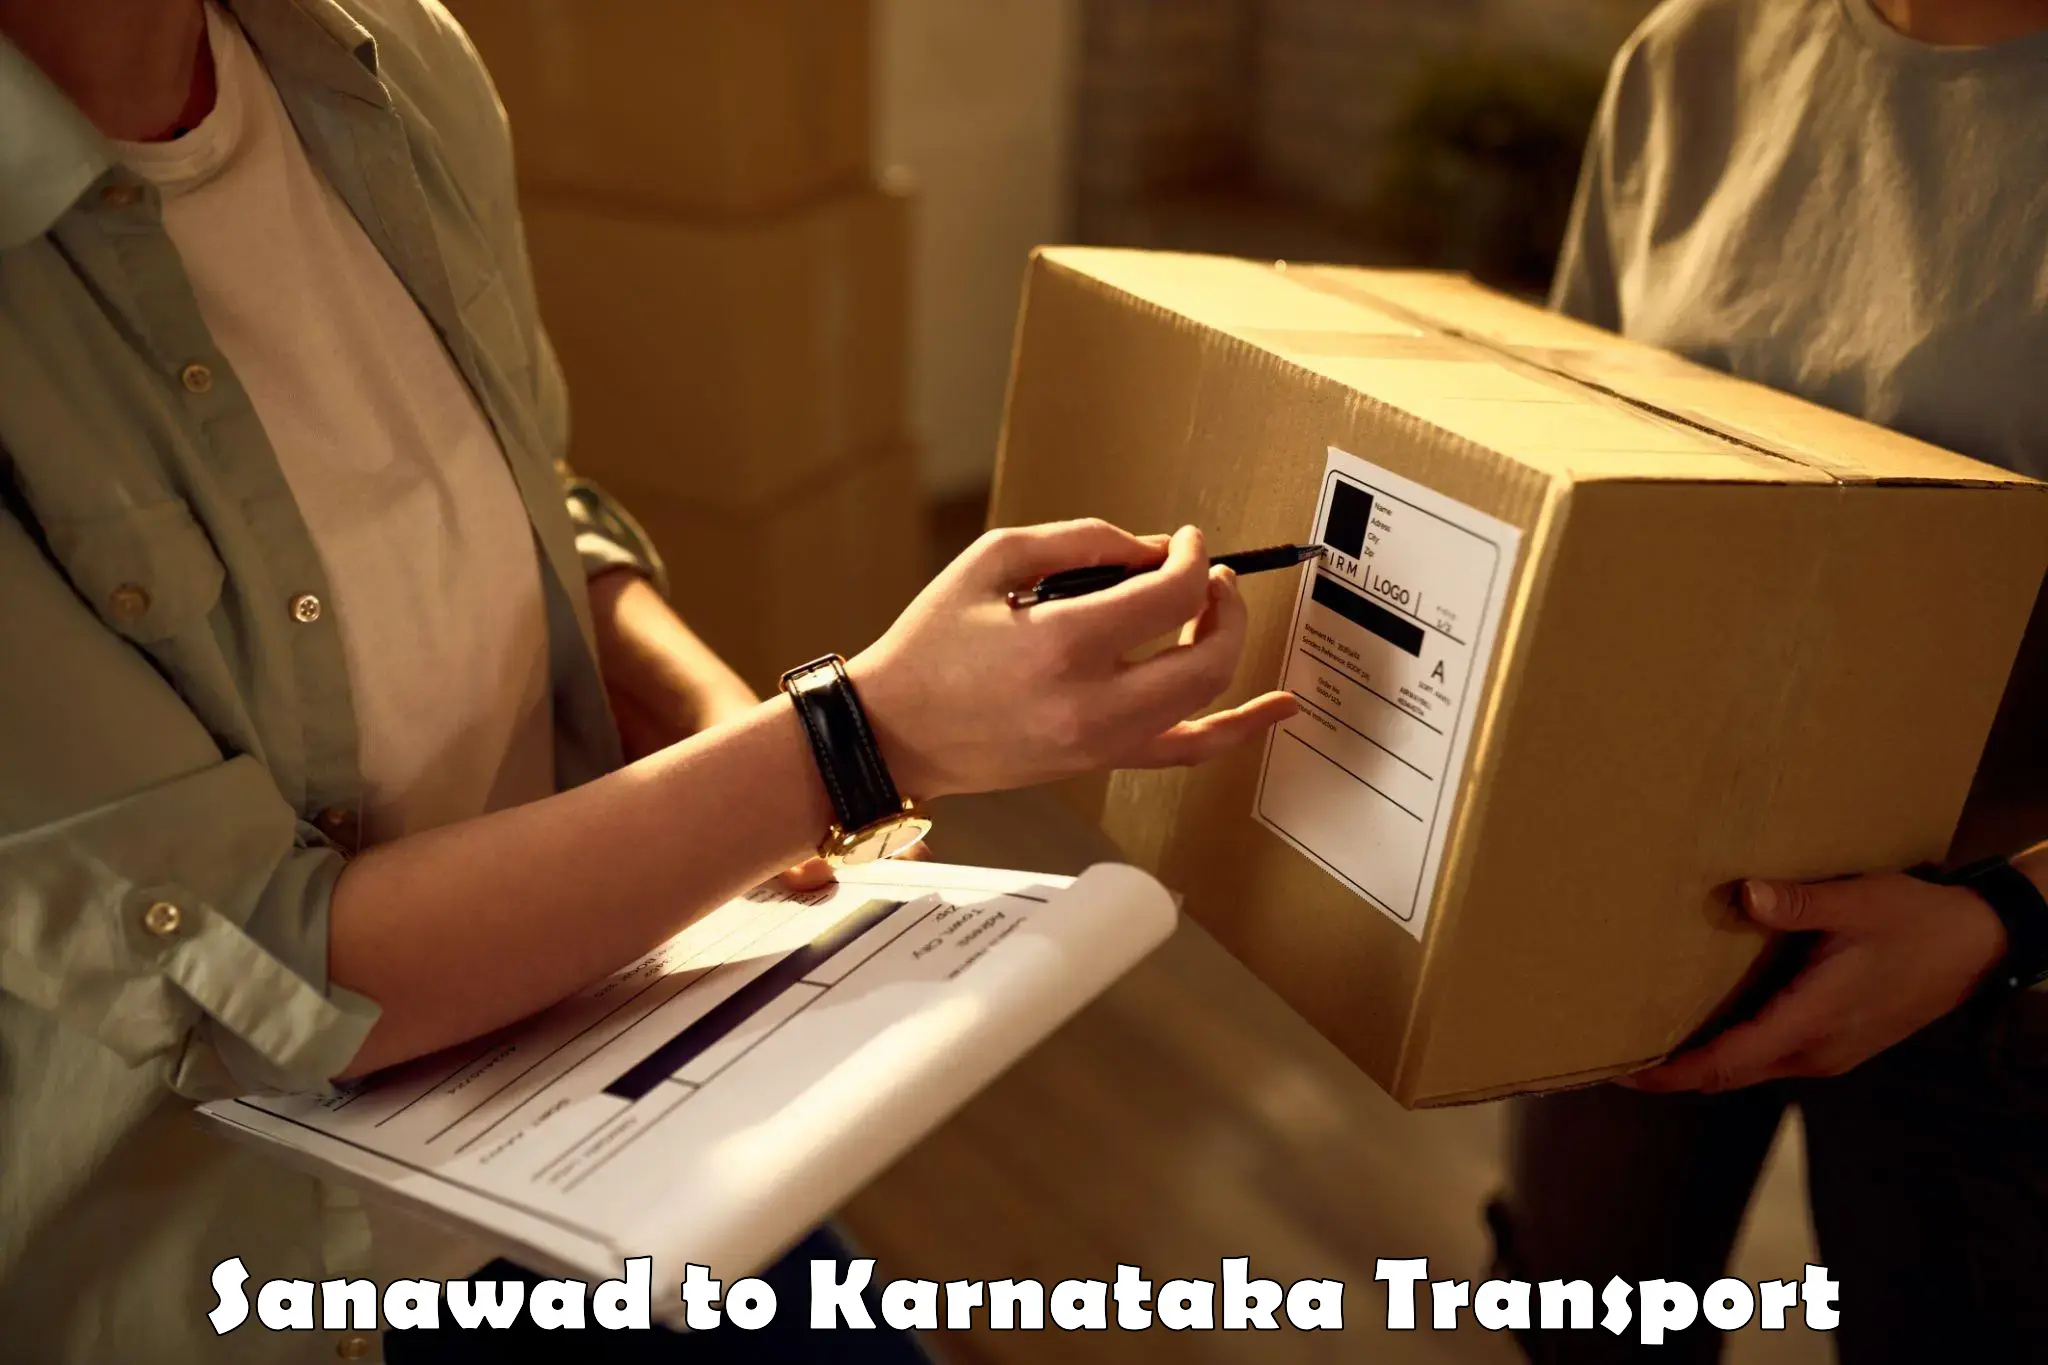 Daily parcel service transport Sanawad to Shorapur